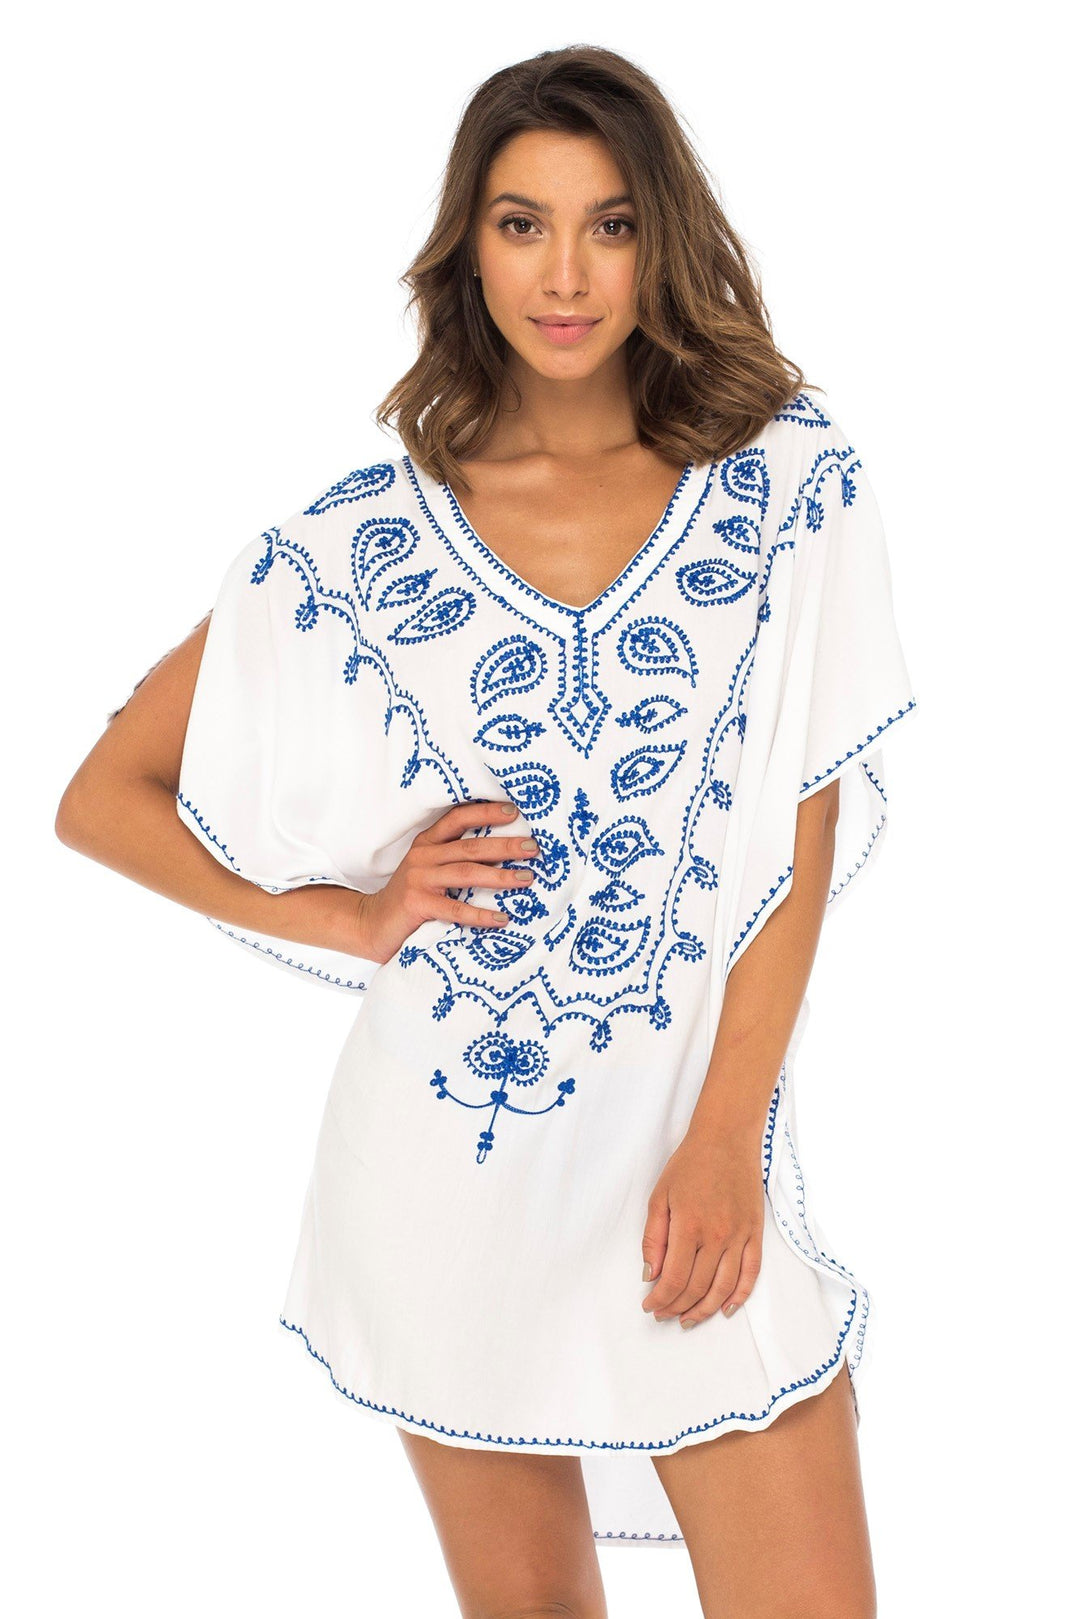 Back From Bali Womens Swimsuit Cover Up Bathing Suit Bikini Swimwear Cover Embroidered Boho Beach Tunic